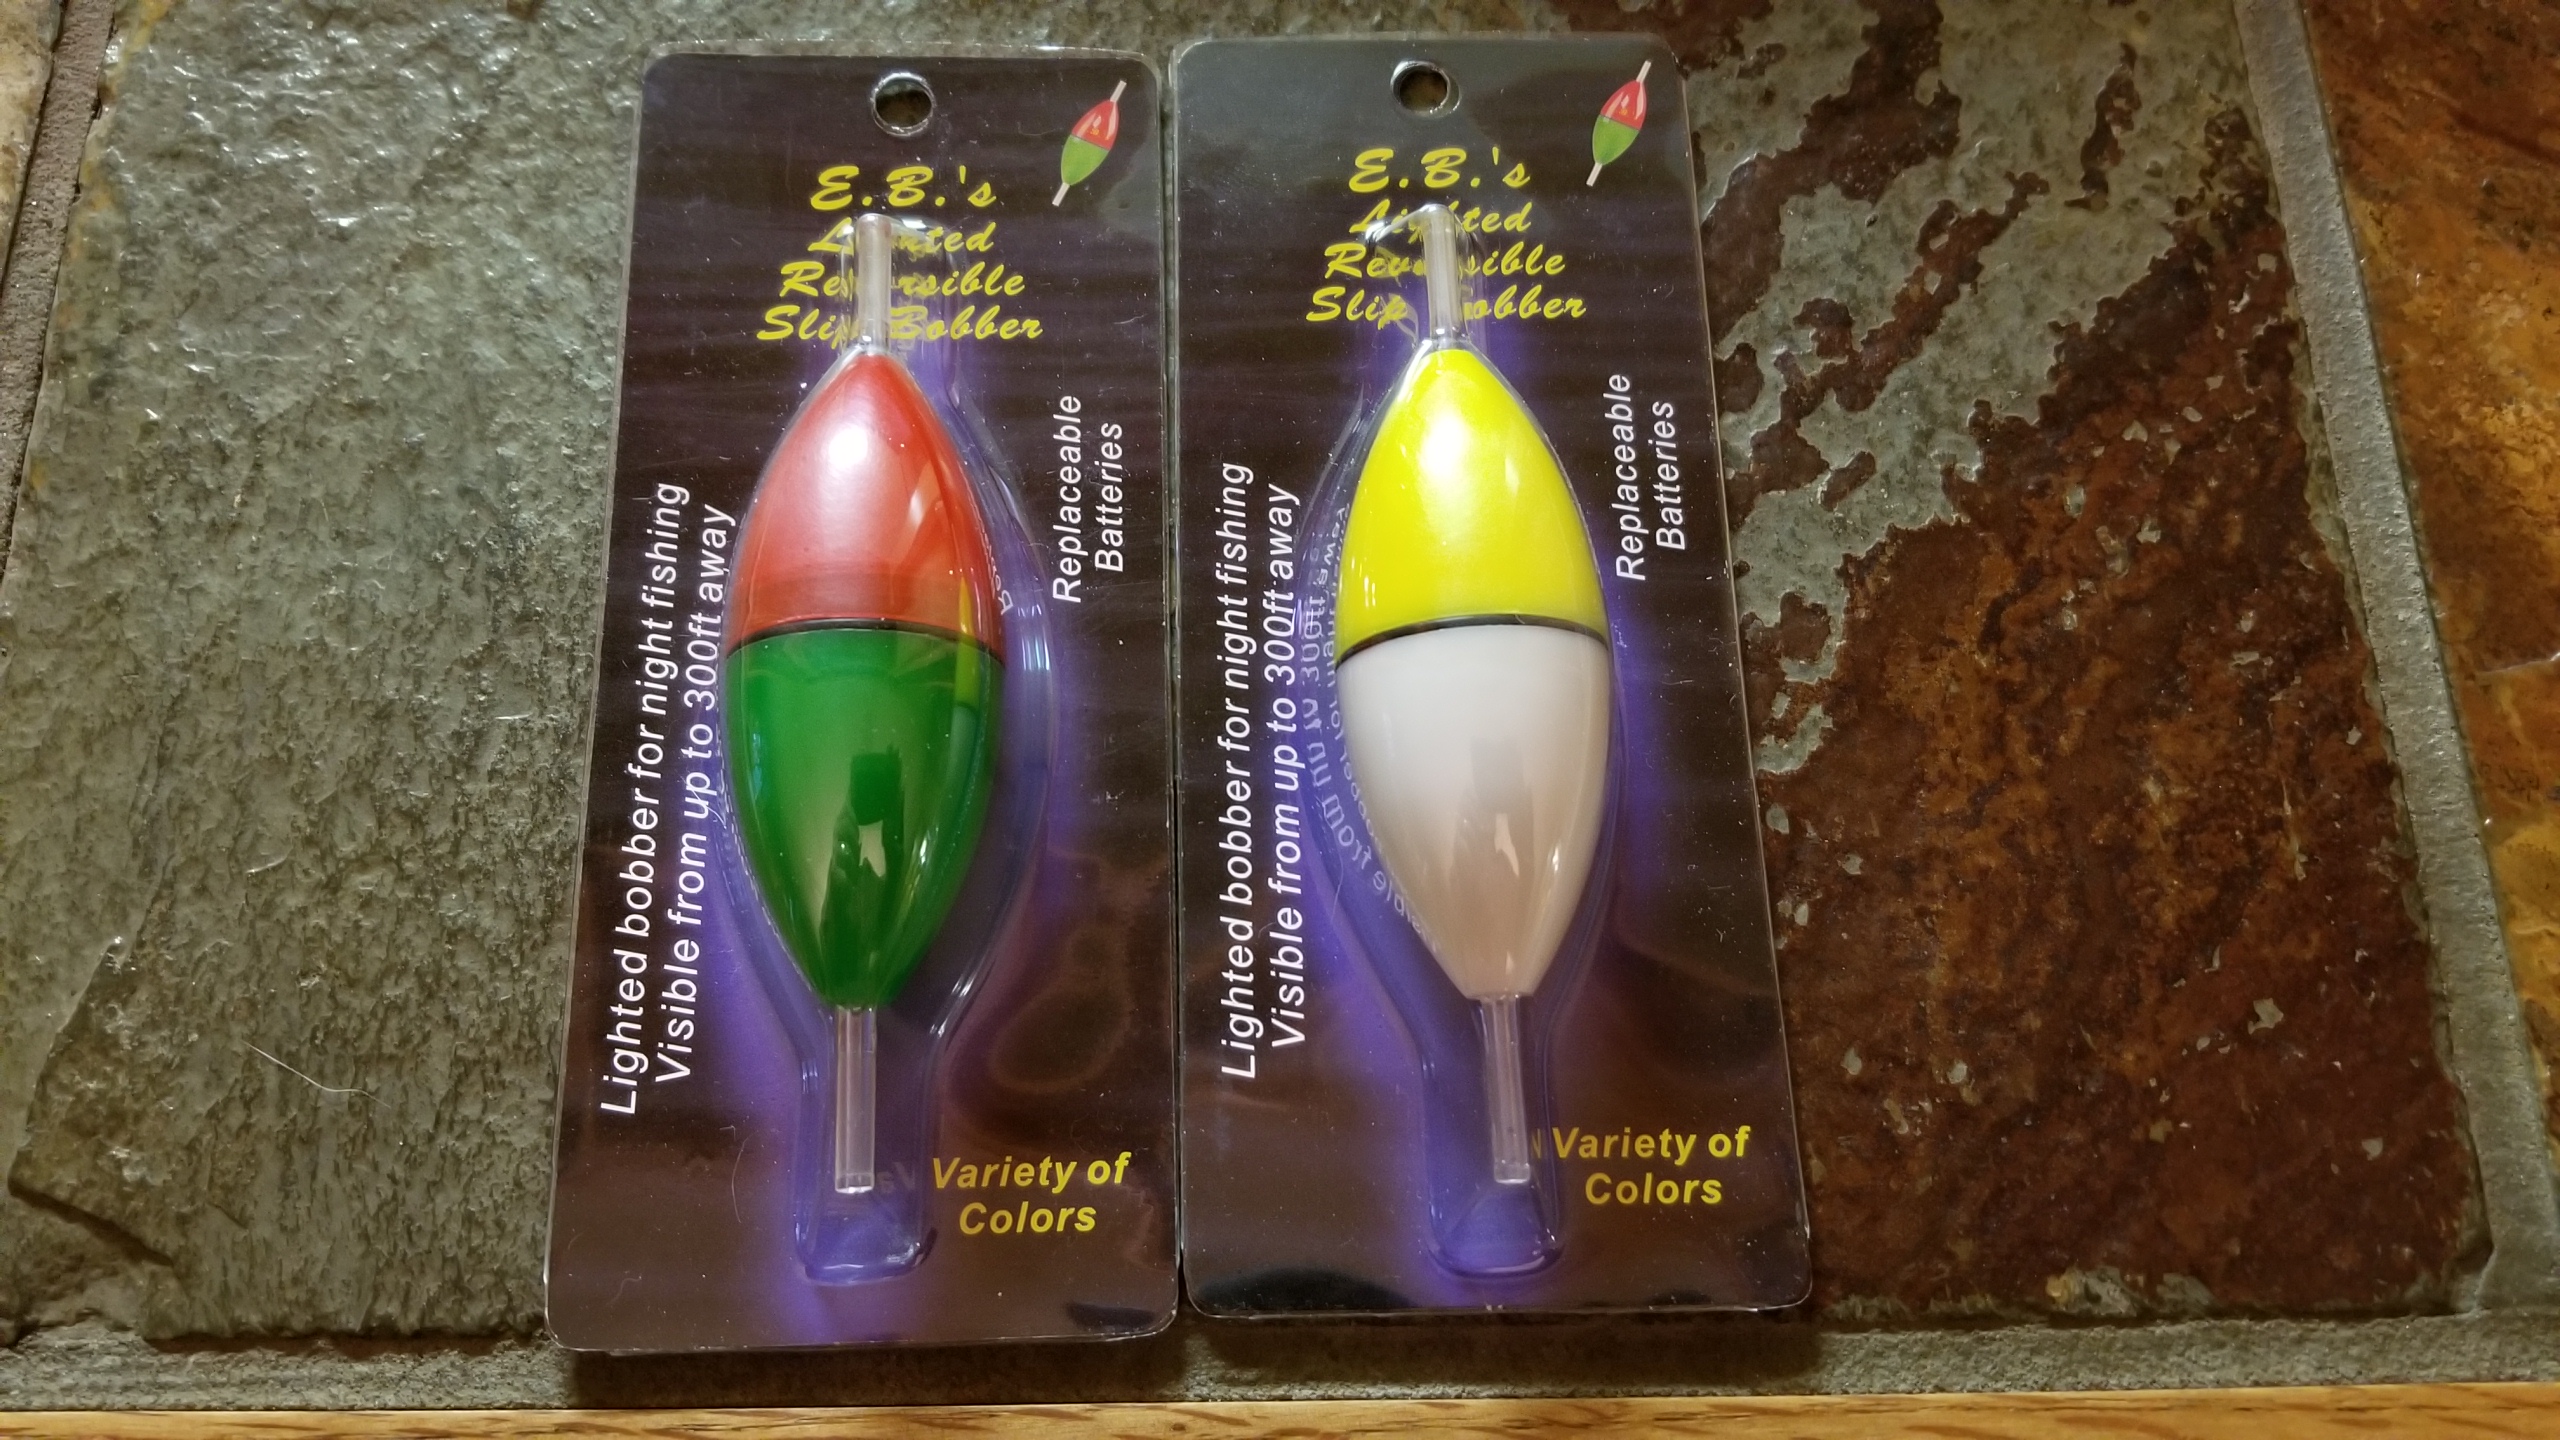 E. B.'s lighted bobbers - General Discussion Forum - General Discussion  Forum